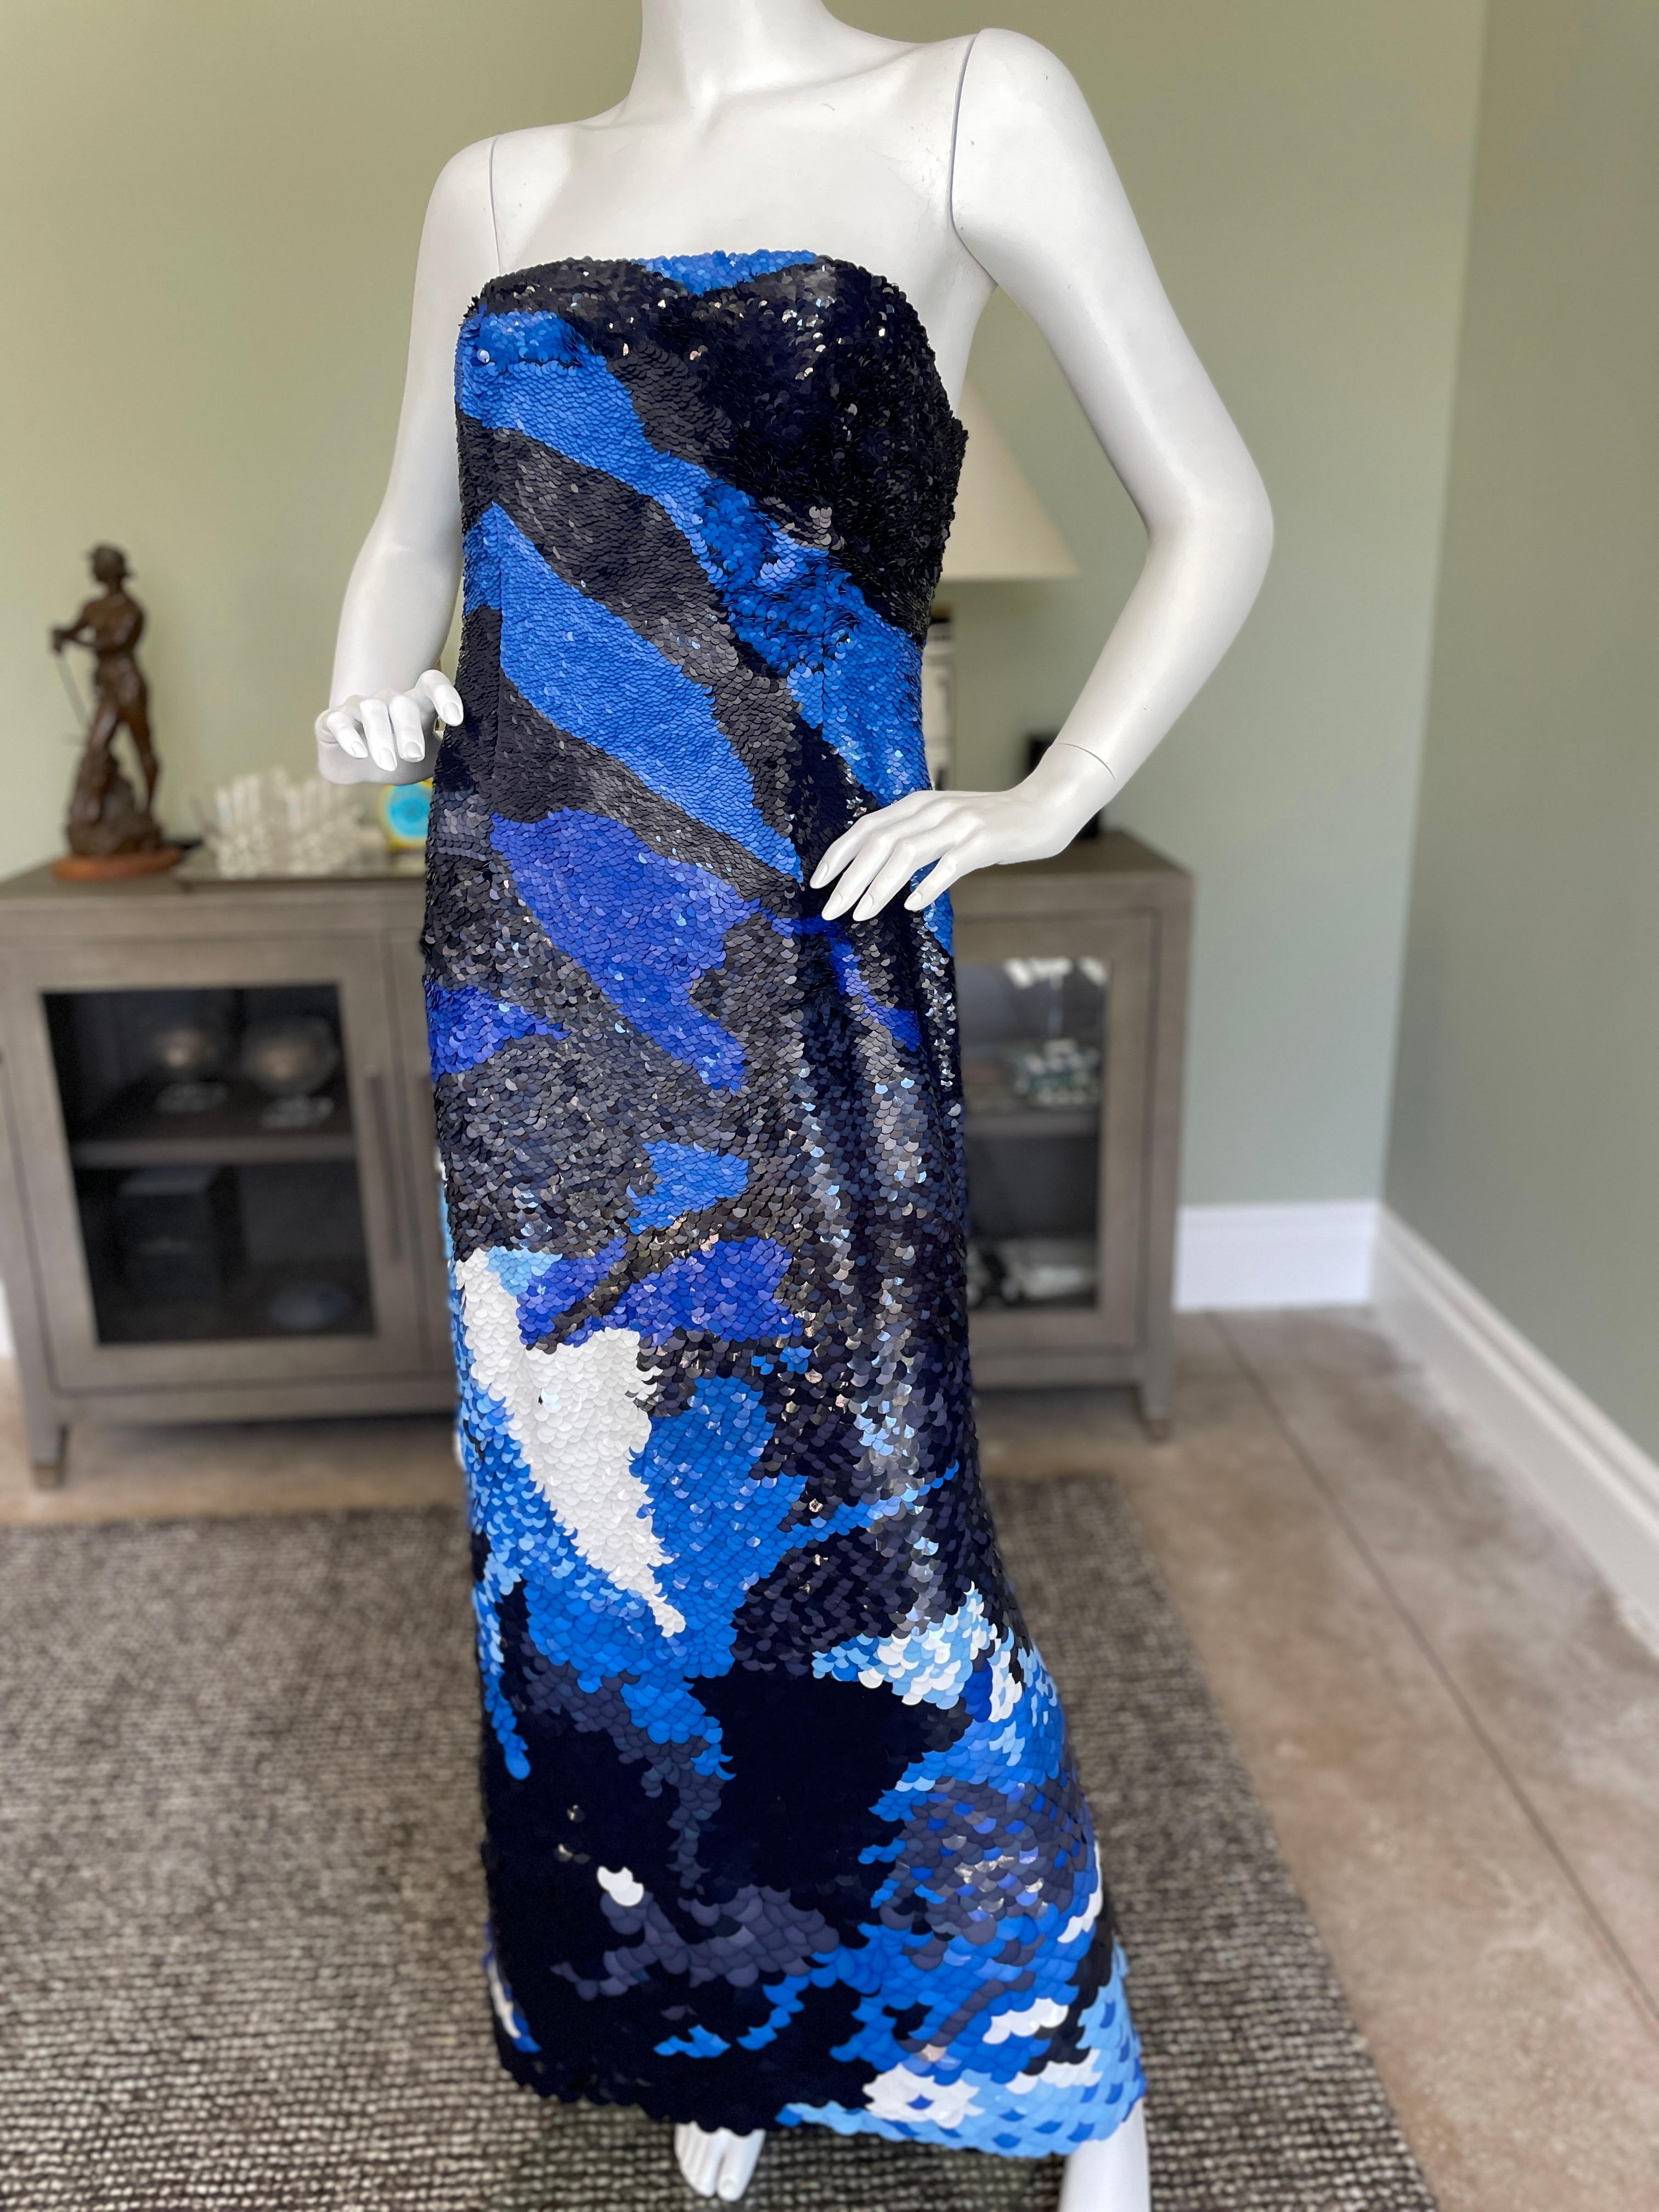 Oscar de la Renta Vintage Fish Scale Sequin Corset Evening Dress with Matching Jacket
Stunning. Please use the zoom feature to see all the remarkable details. 
The sequins start out very small at the top and gradually become very large fish scale